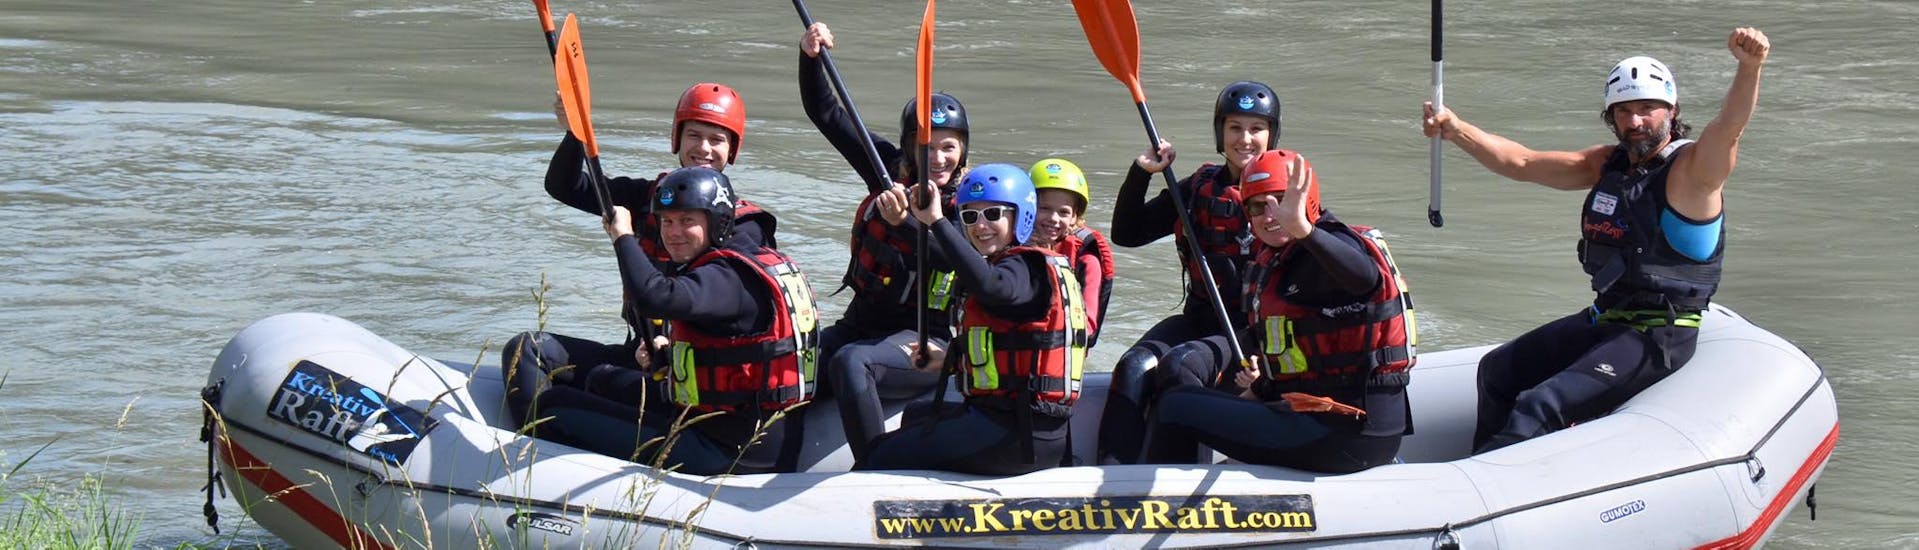 rafting-on-the-rienza-river-action-safety-kreativraft-hero